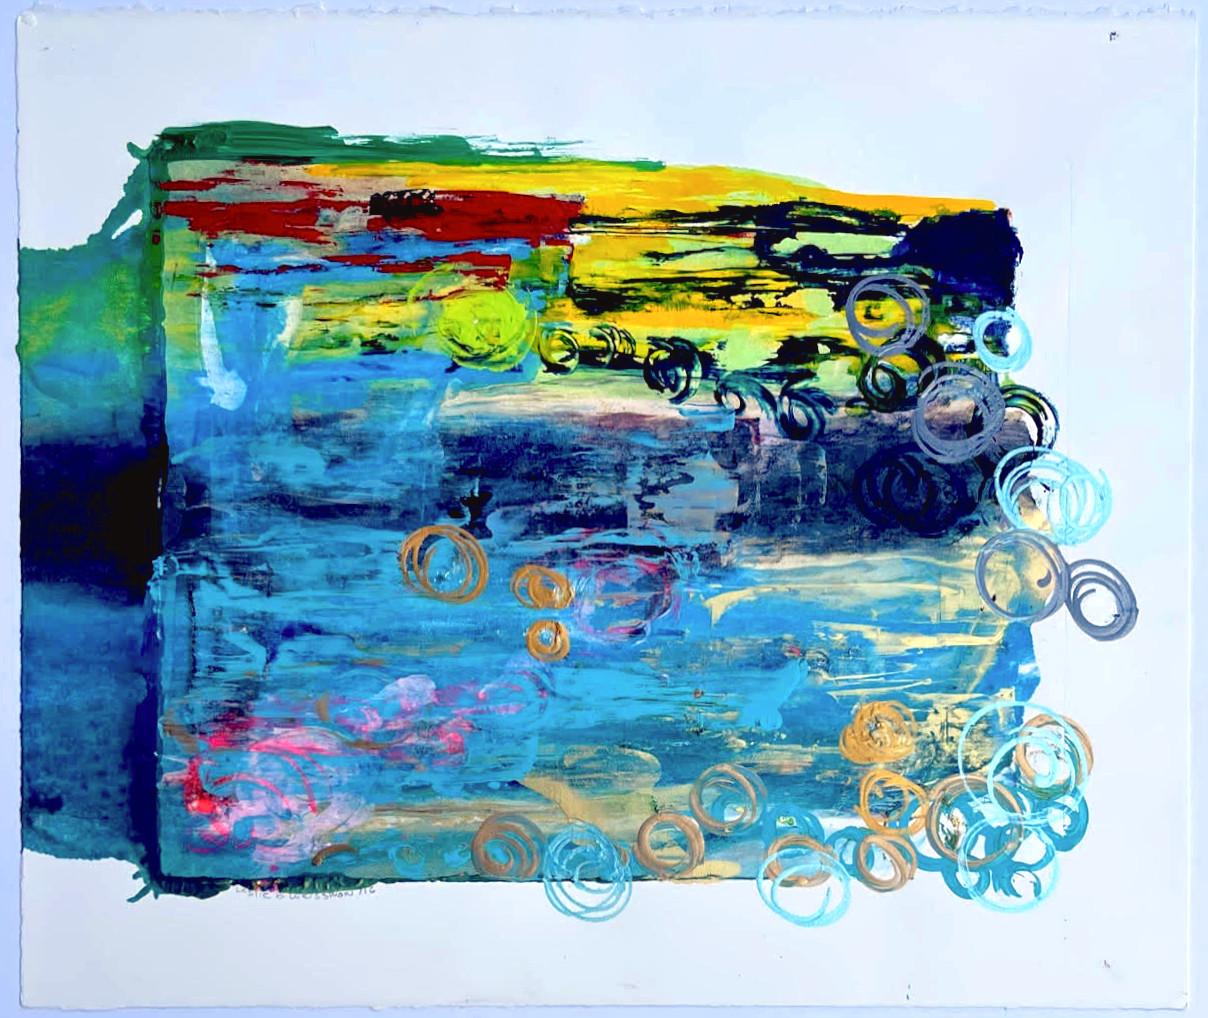 Untitled Abstraction - Mixed Media Art by Leslie B. Weissman